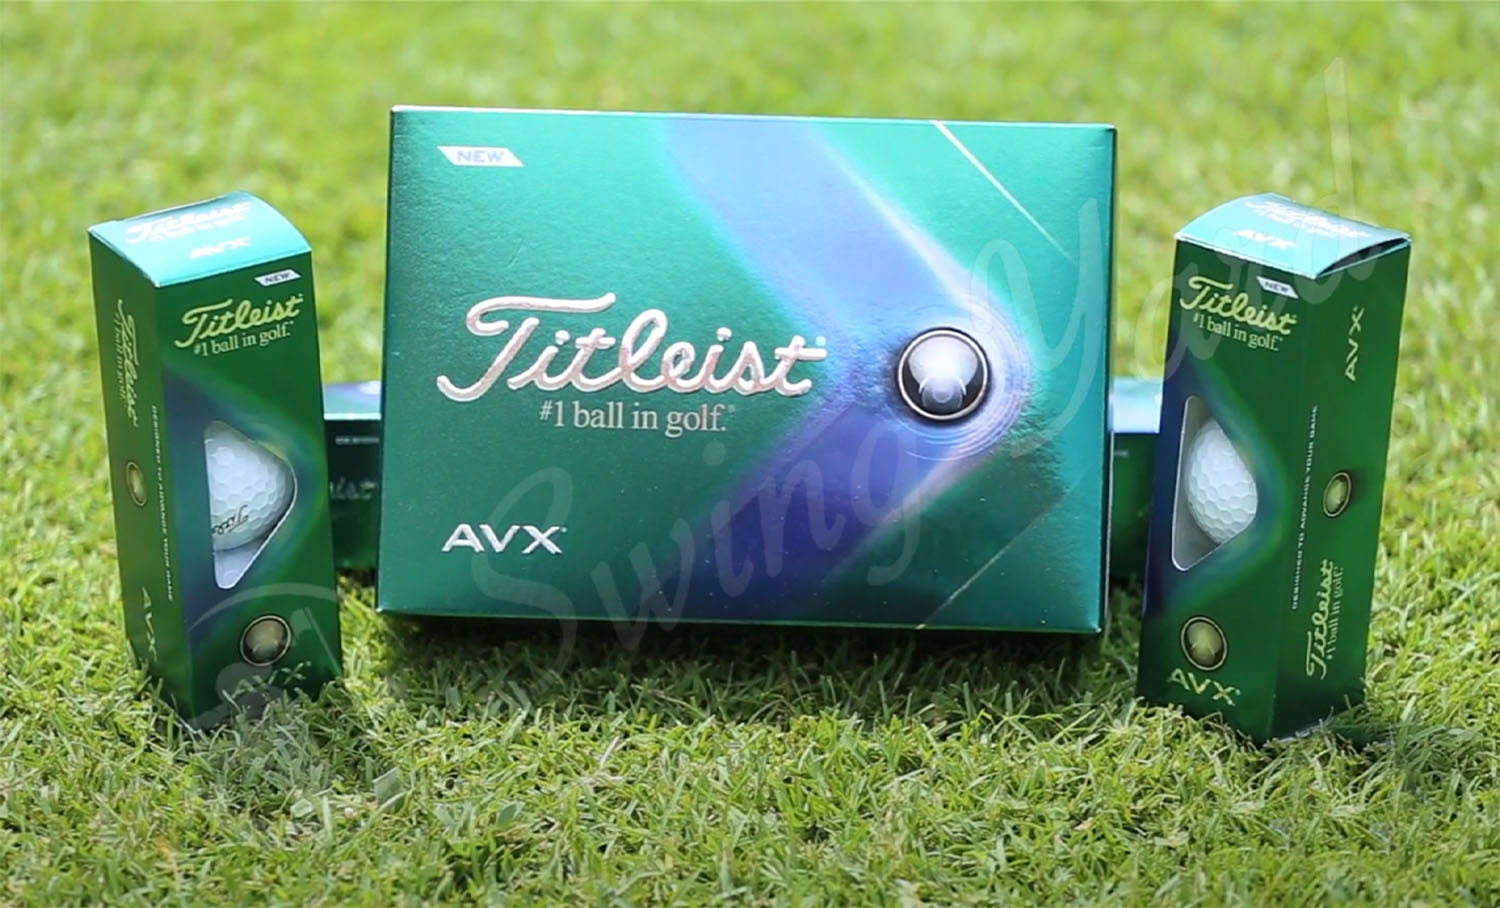 The Titleist AVX boxes in the grass at the golf course